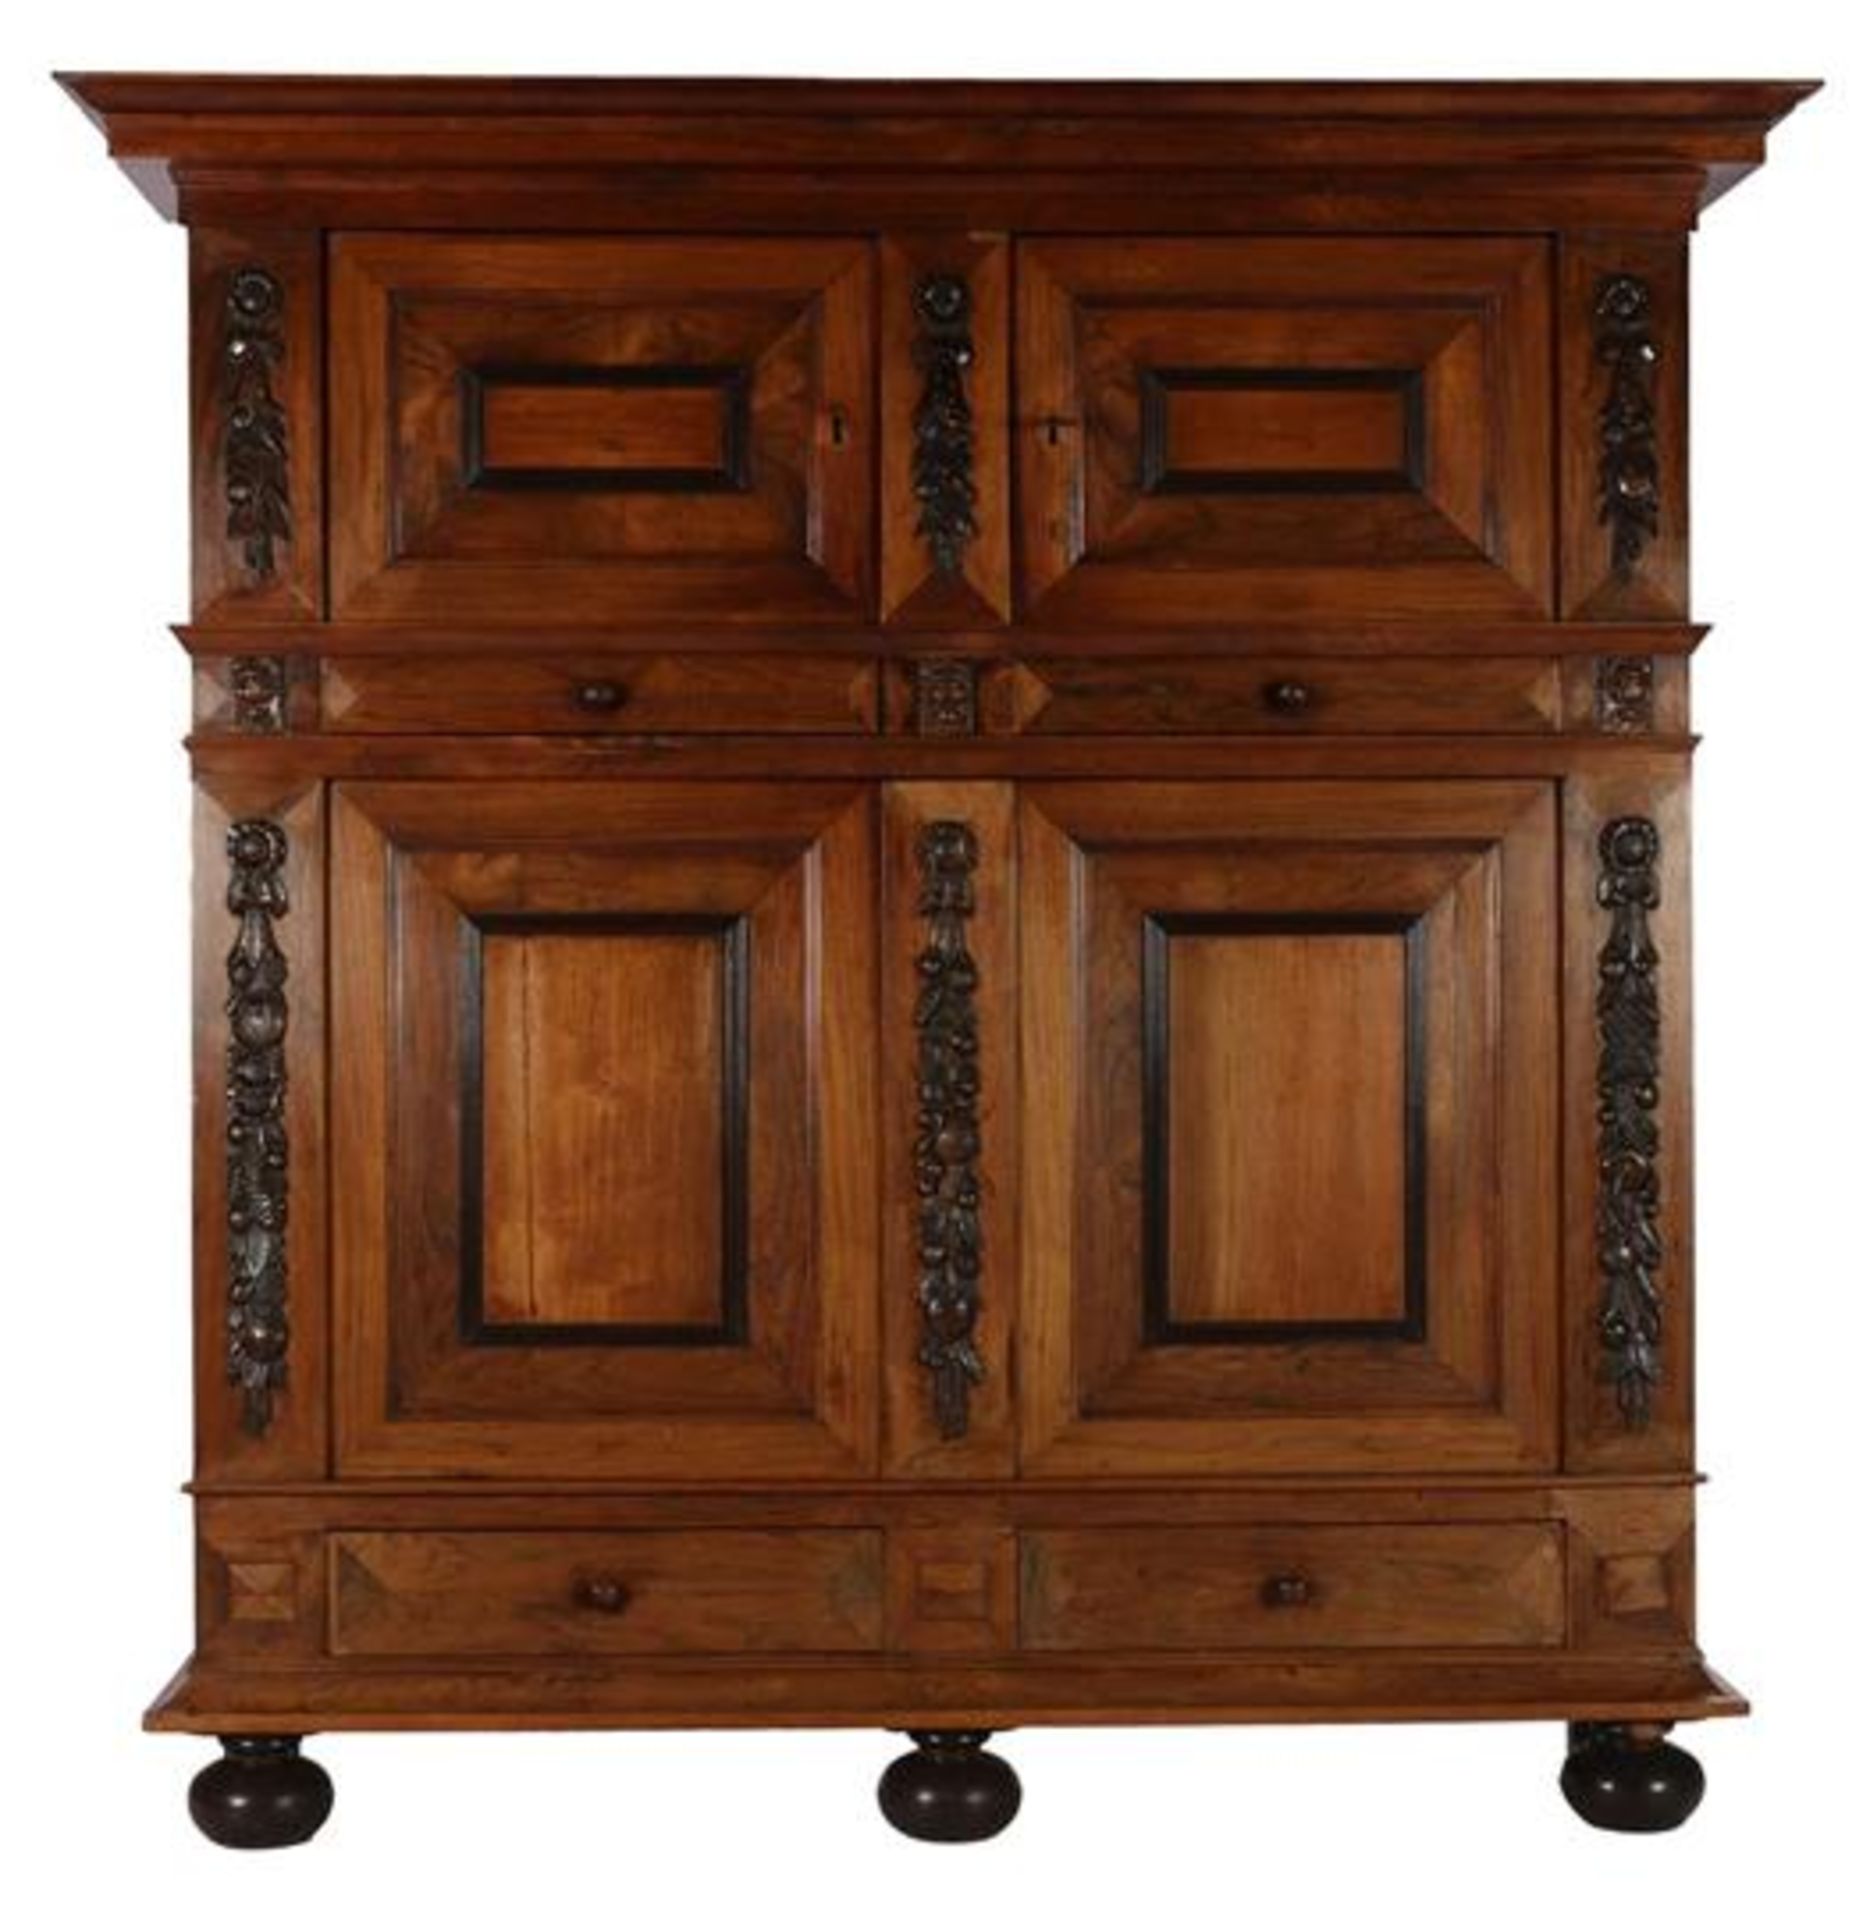 Walnut veneer on oak 2-part cabinet with 4 doors and 4 drawers, profiled frames, scroll decoration